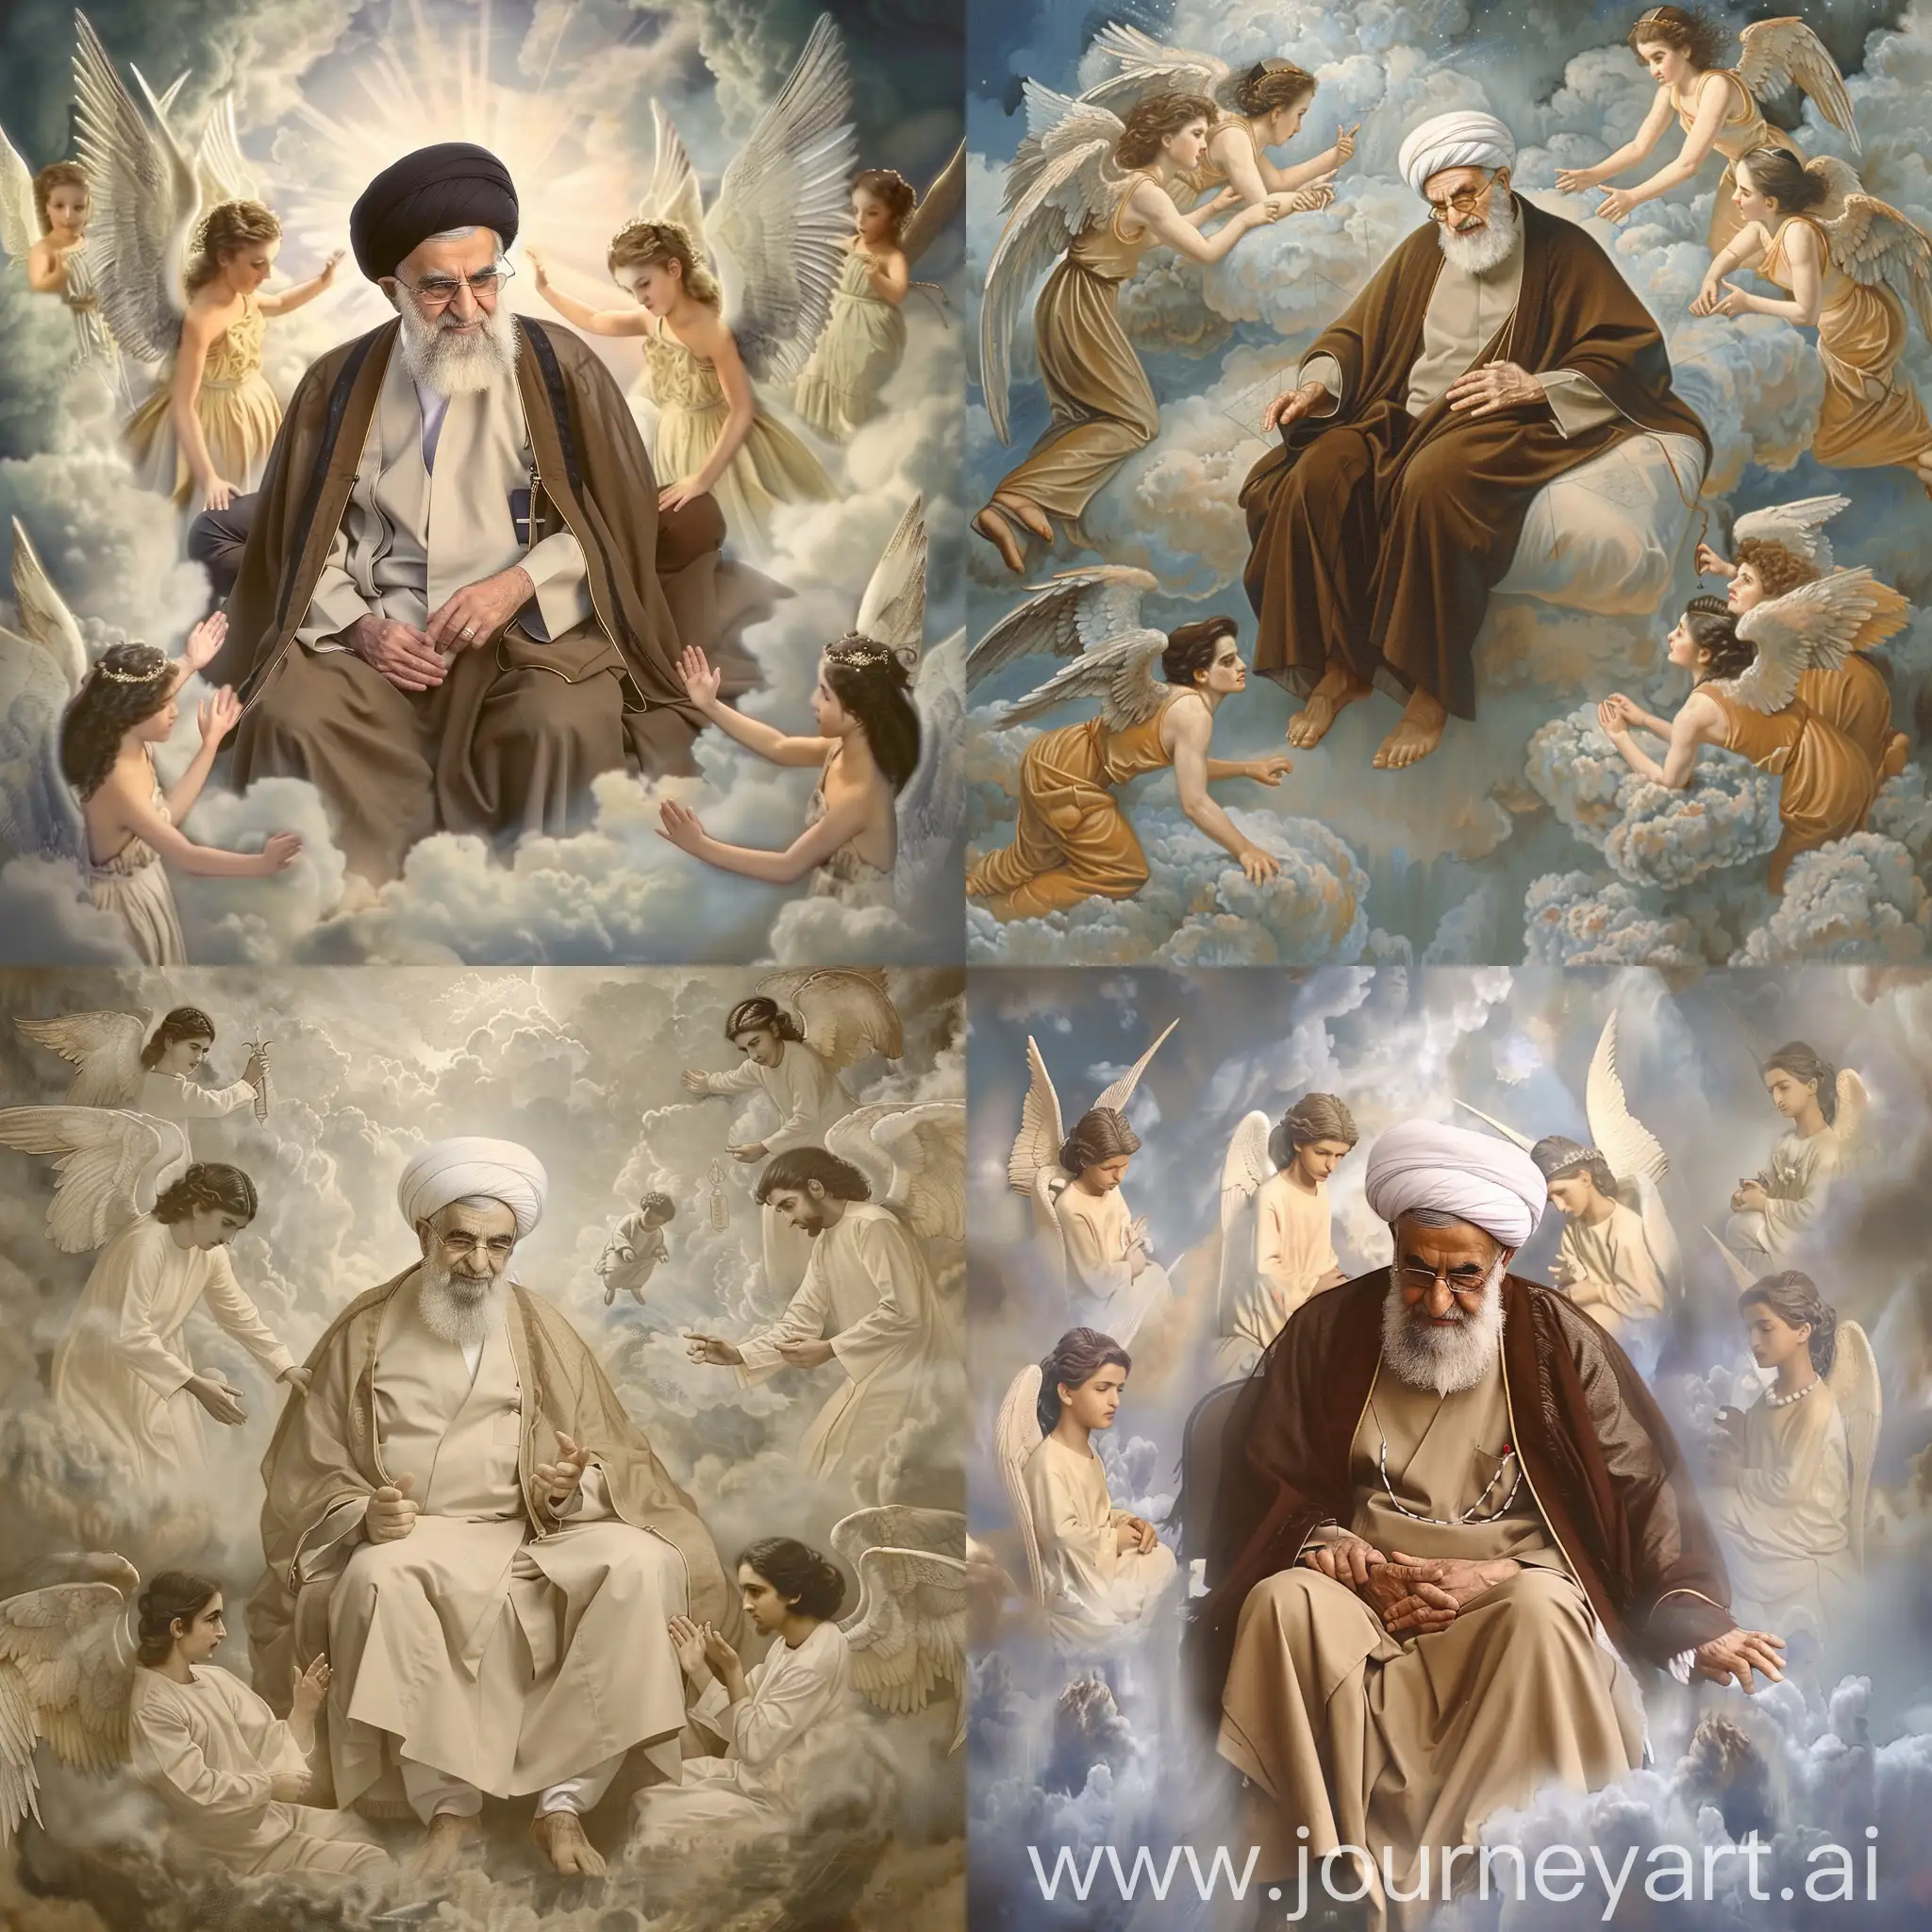 Imam-Khomeini-with-Angels-in-Heavenly-Serenity